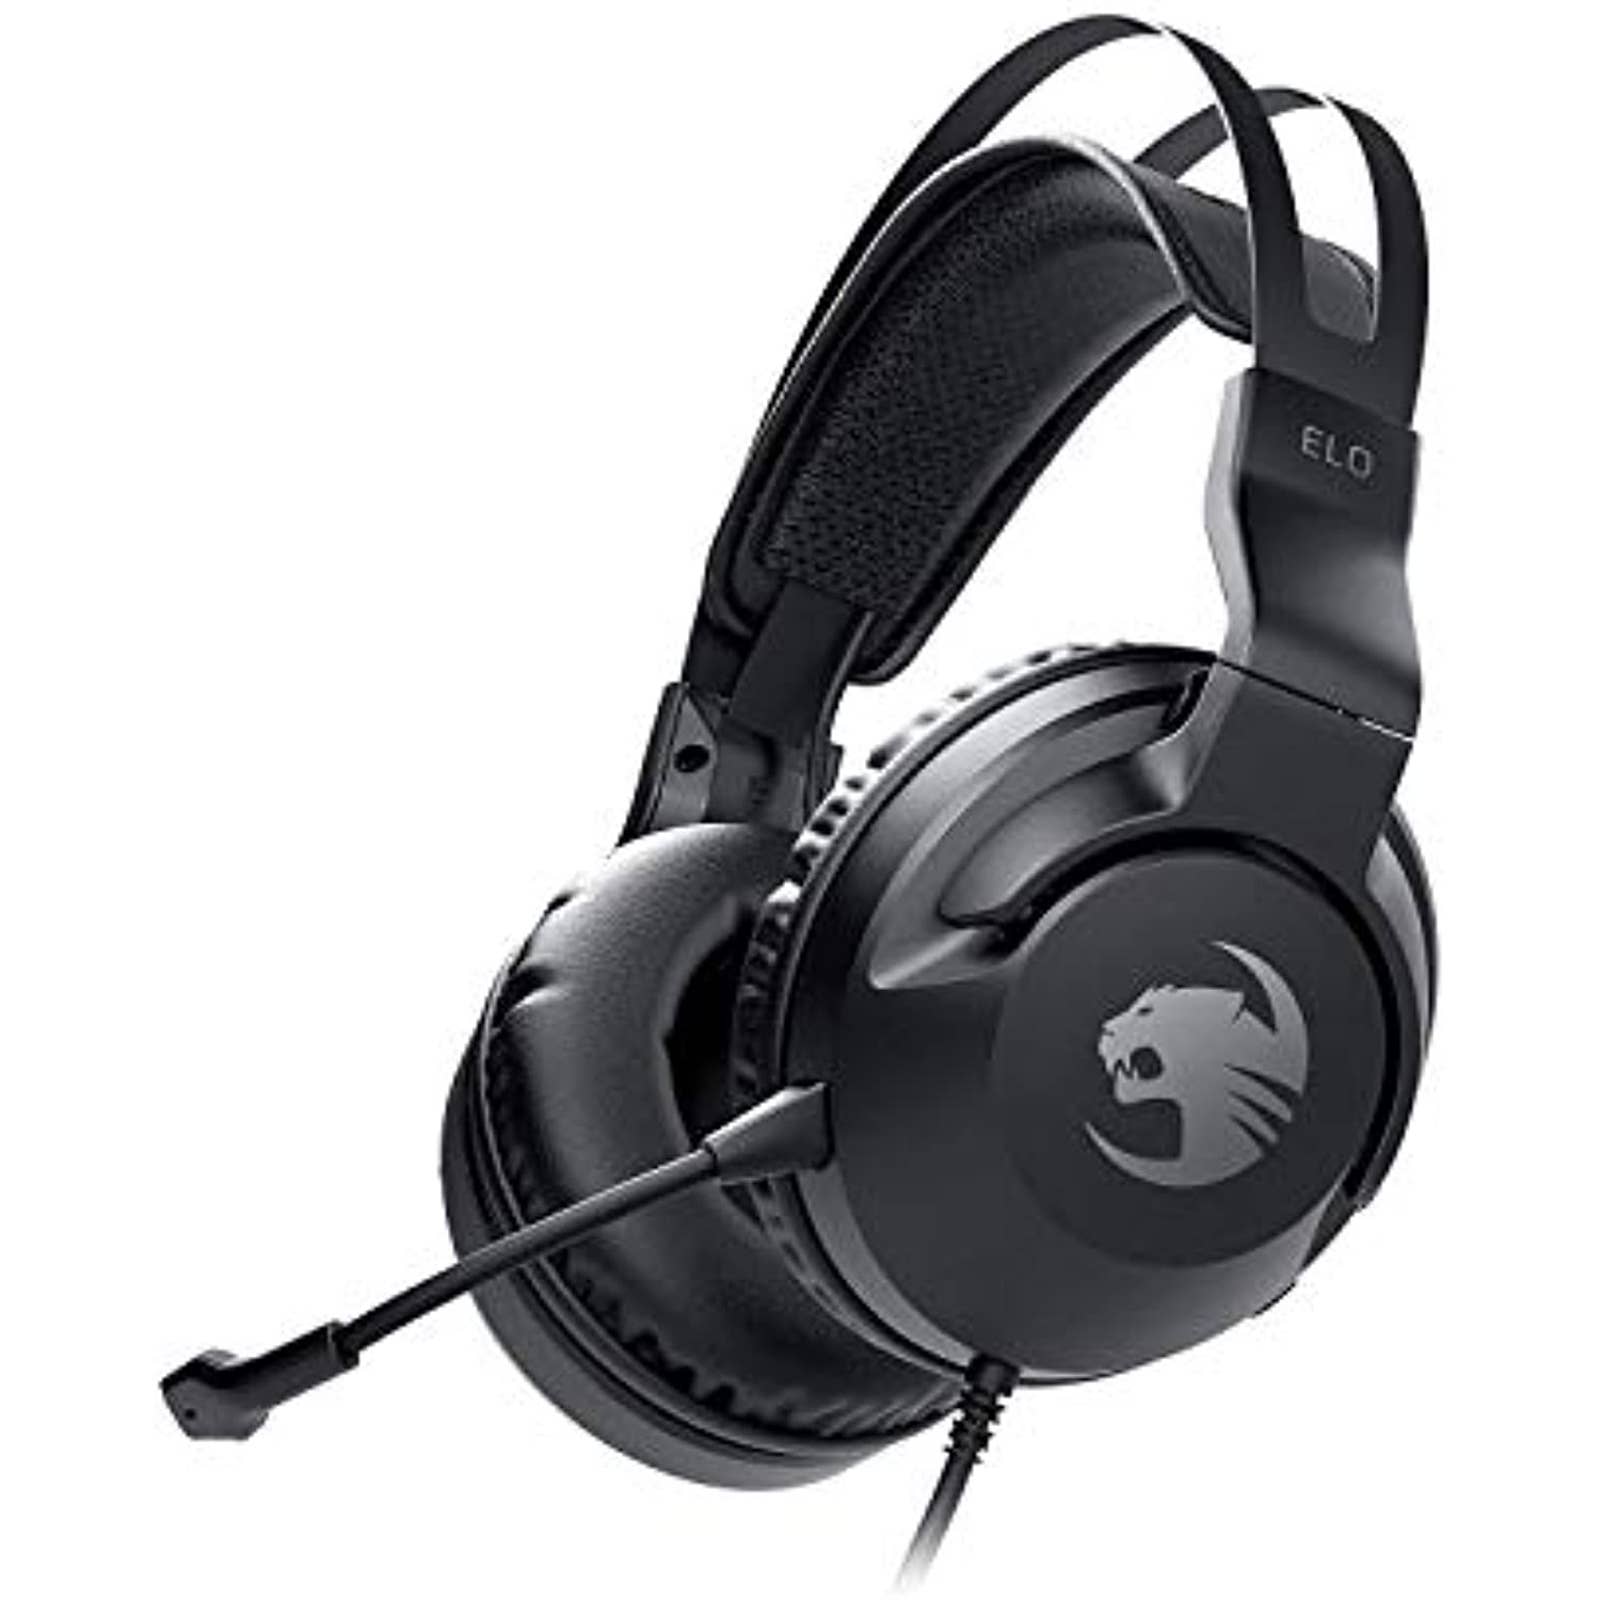 ROCCAT - ROC-14-120-01 Elo X Stereo Wired Gaming Headset for PC, Xbox Series X, Xbox Series S, PlayStation 5 and Nintendo Switch - Black